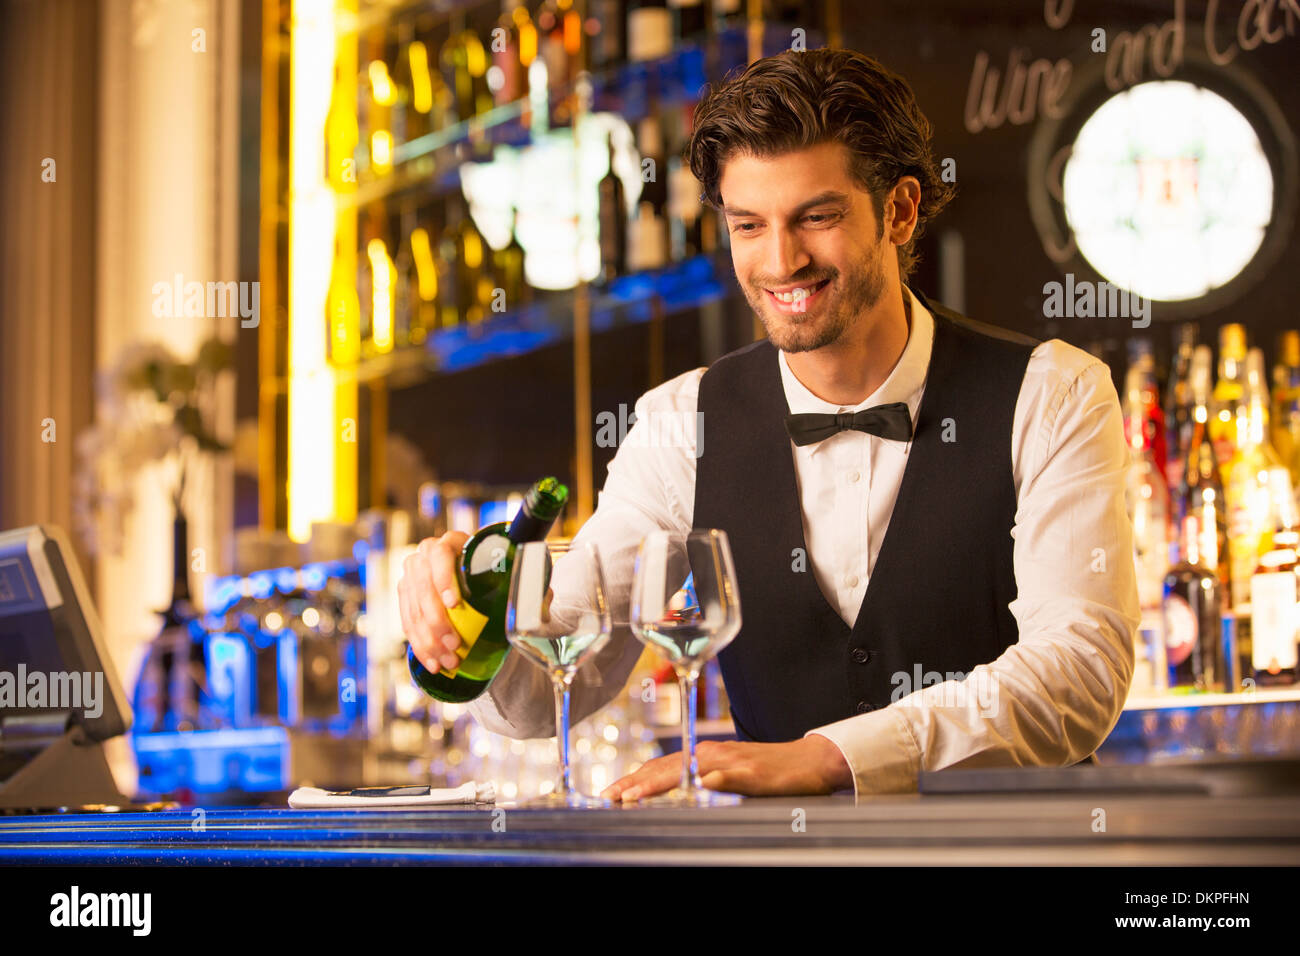 Well dressed bartender pouring wine Stock Photo